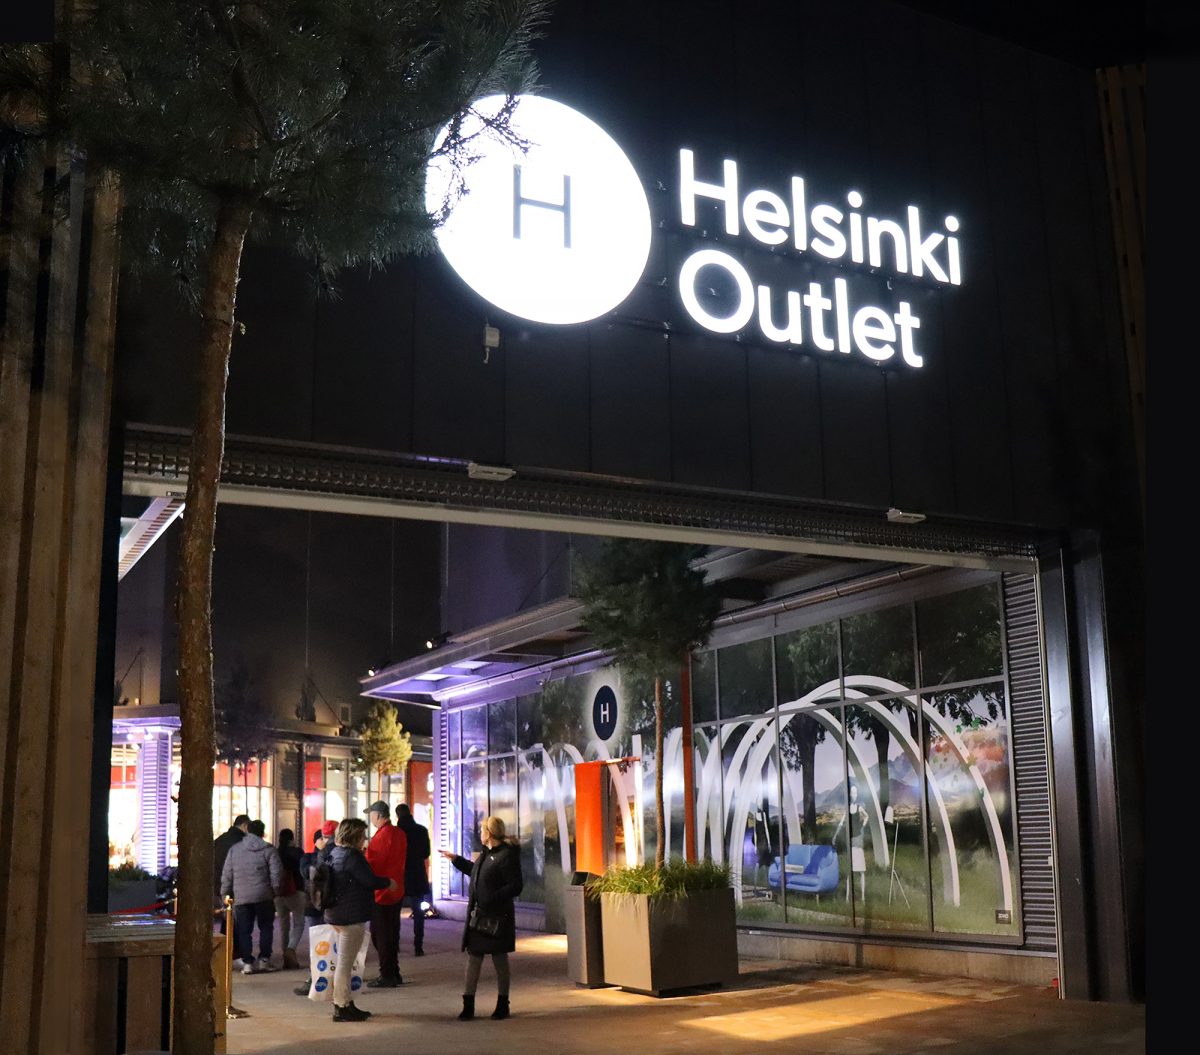 At the entrance to Helsinki Outlet